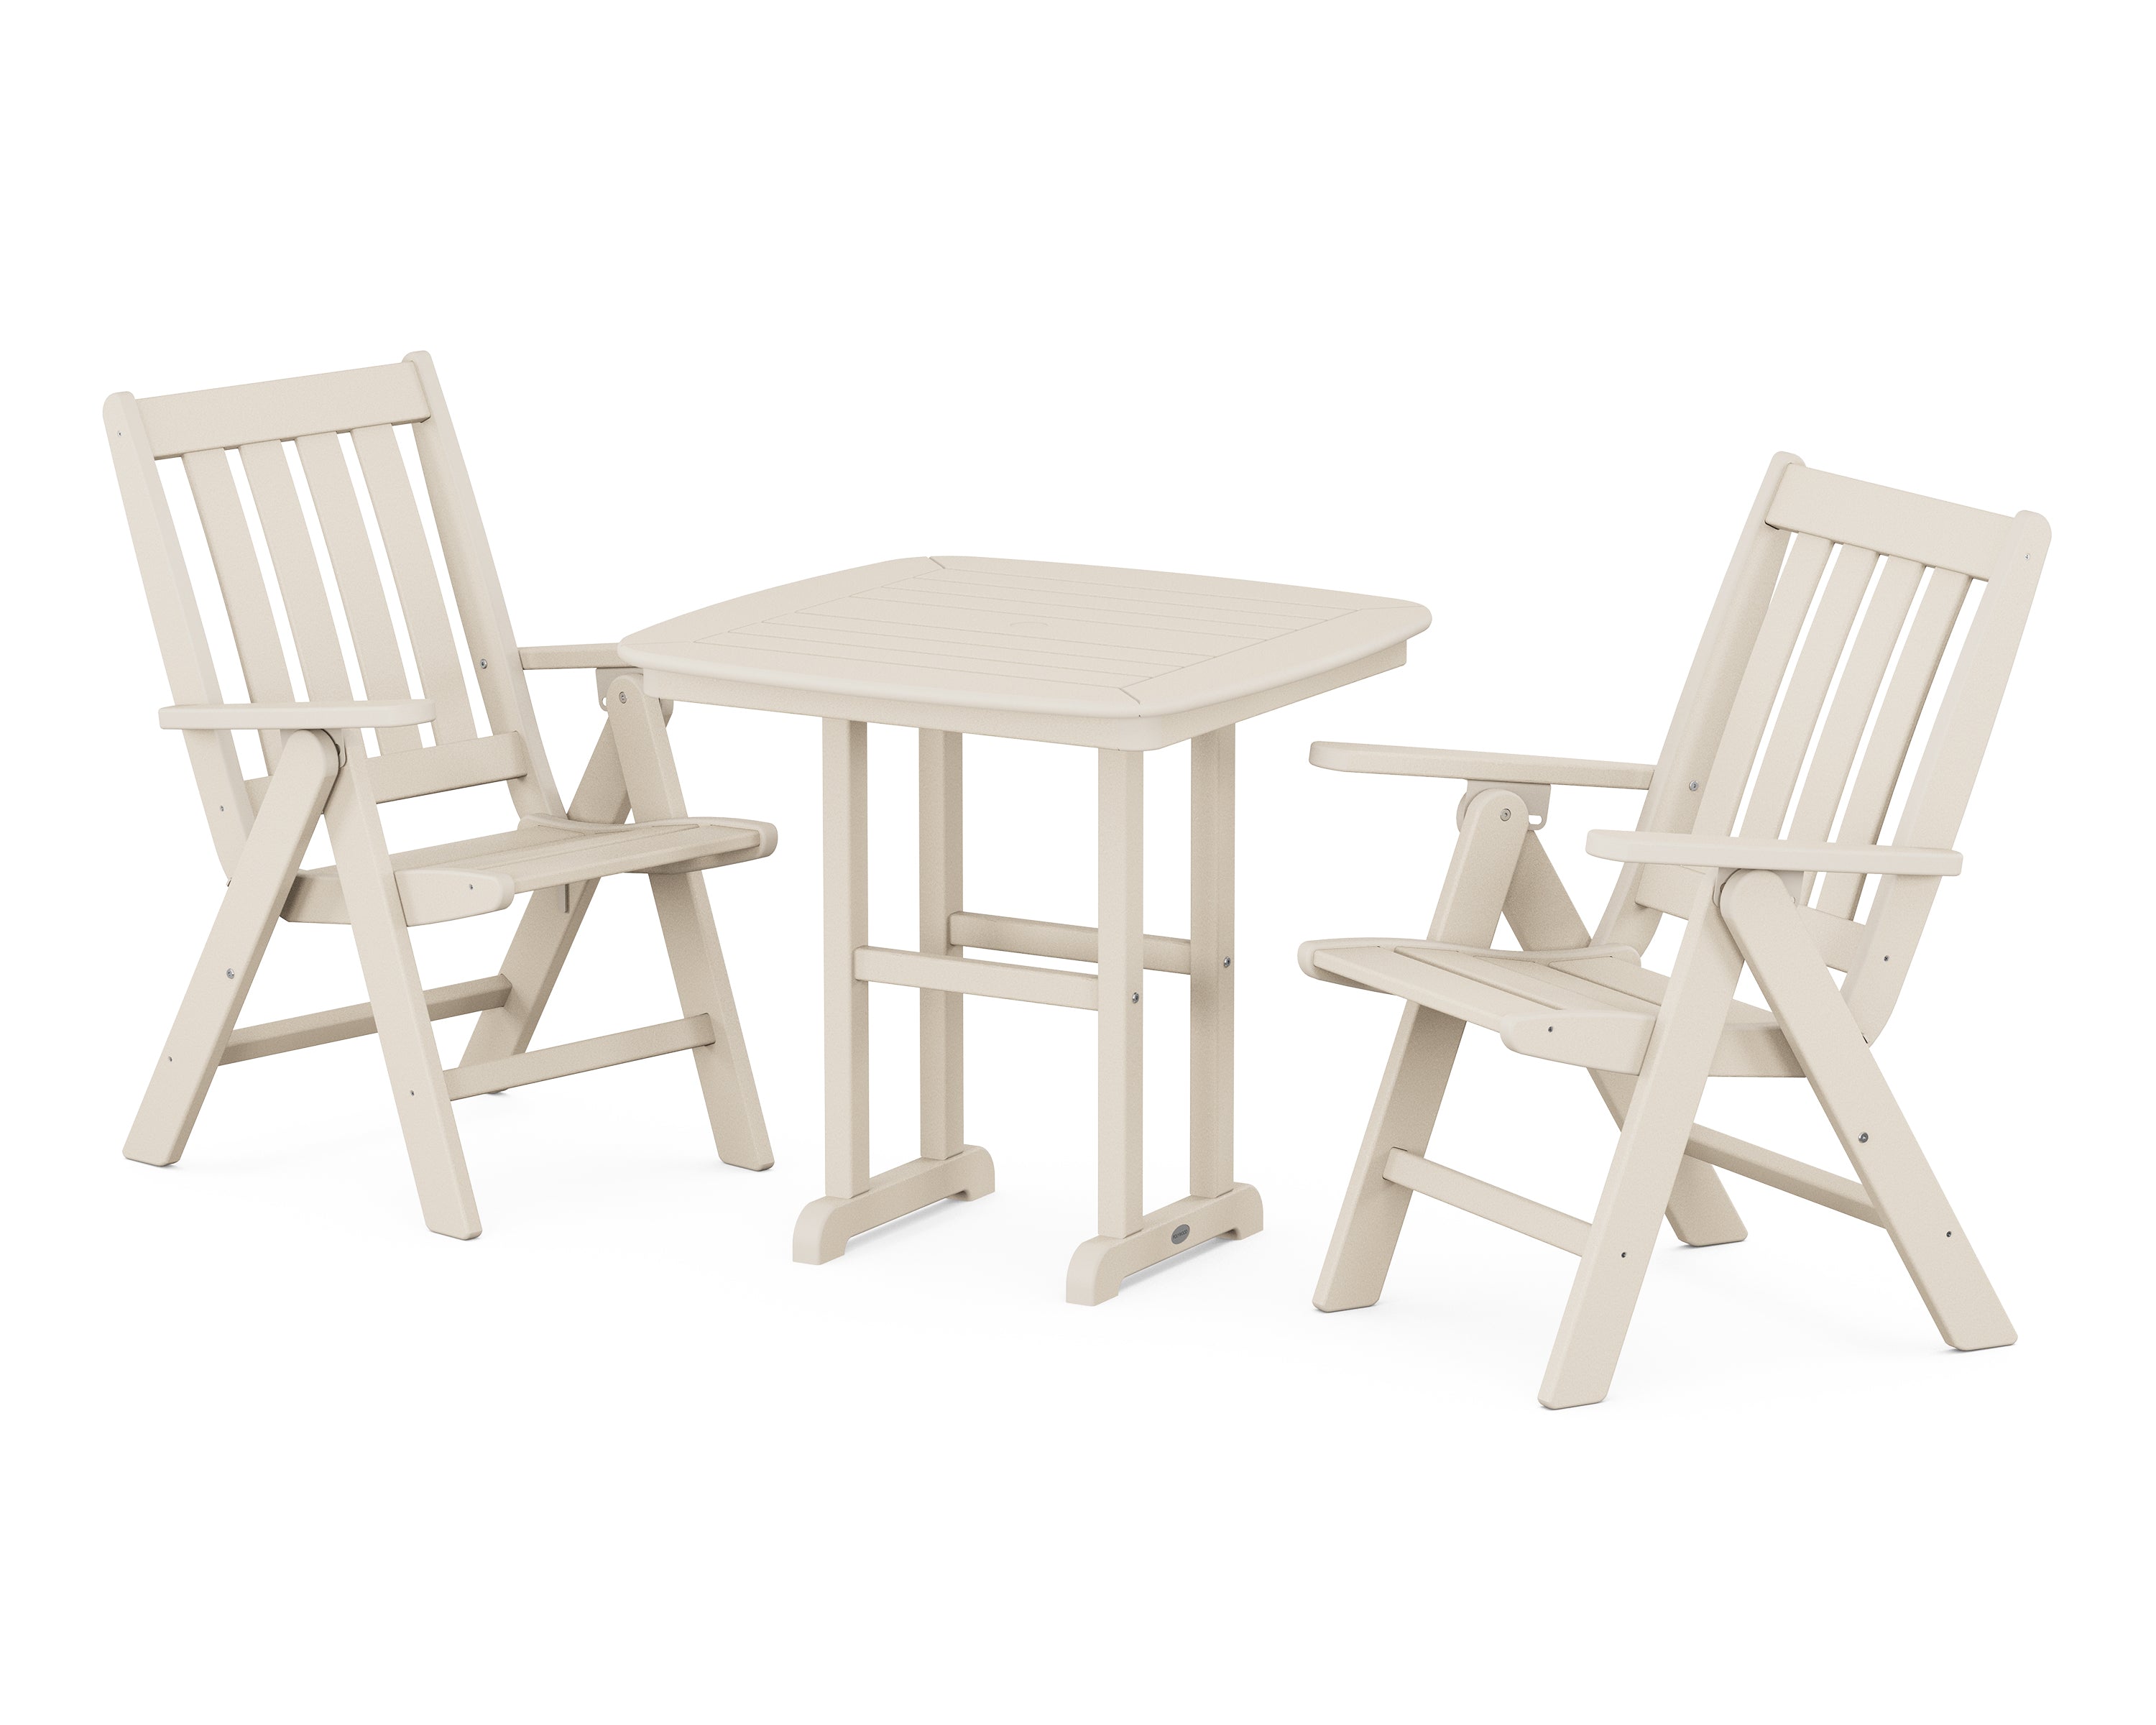 POLYWOOD® Vineyard Folding Chair 3-Piece Dining Set in Sand